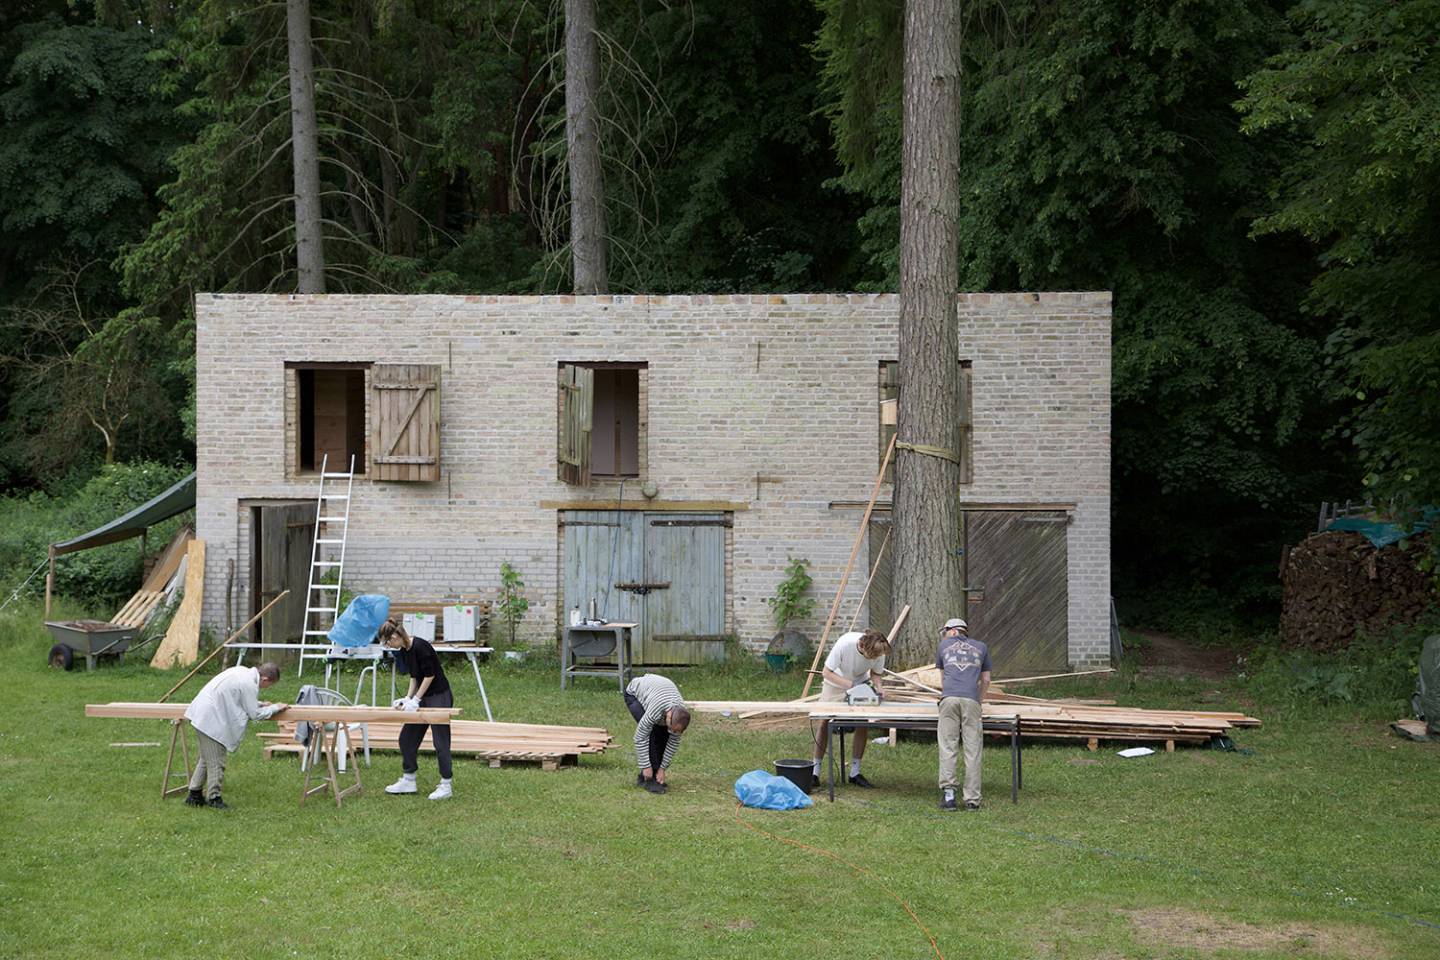 People working with wood in front of a building in nature surrounding.